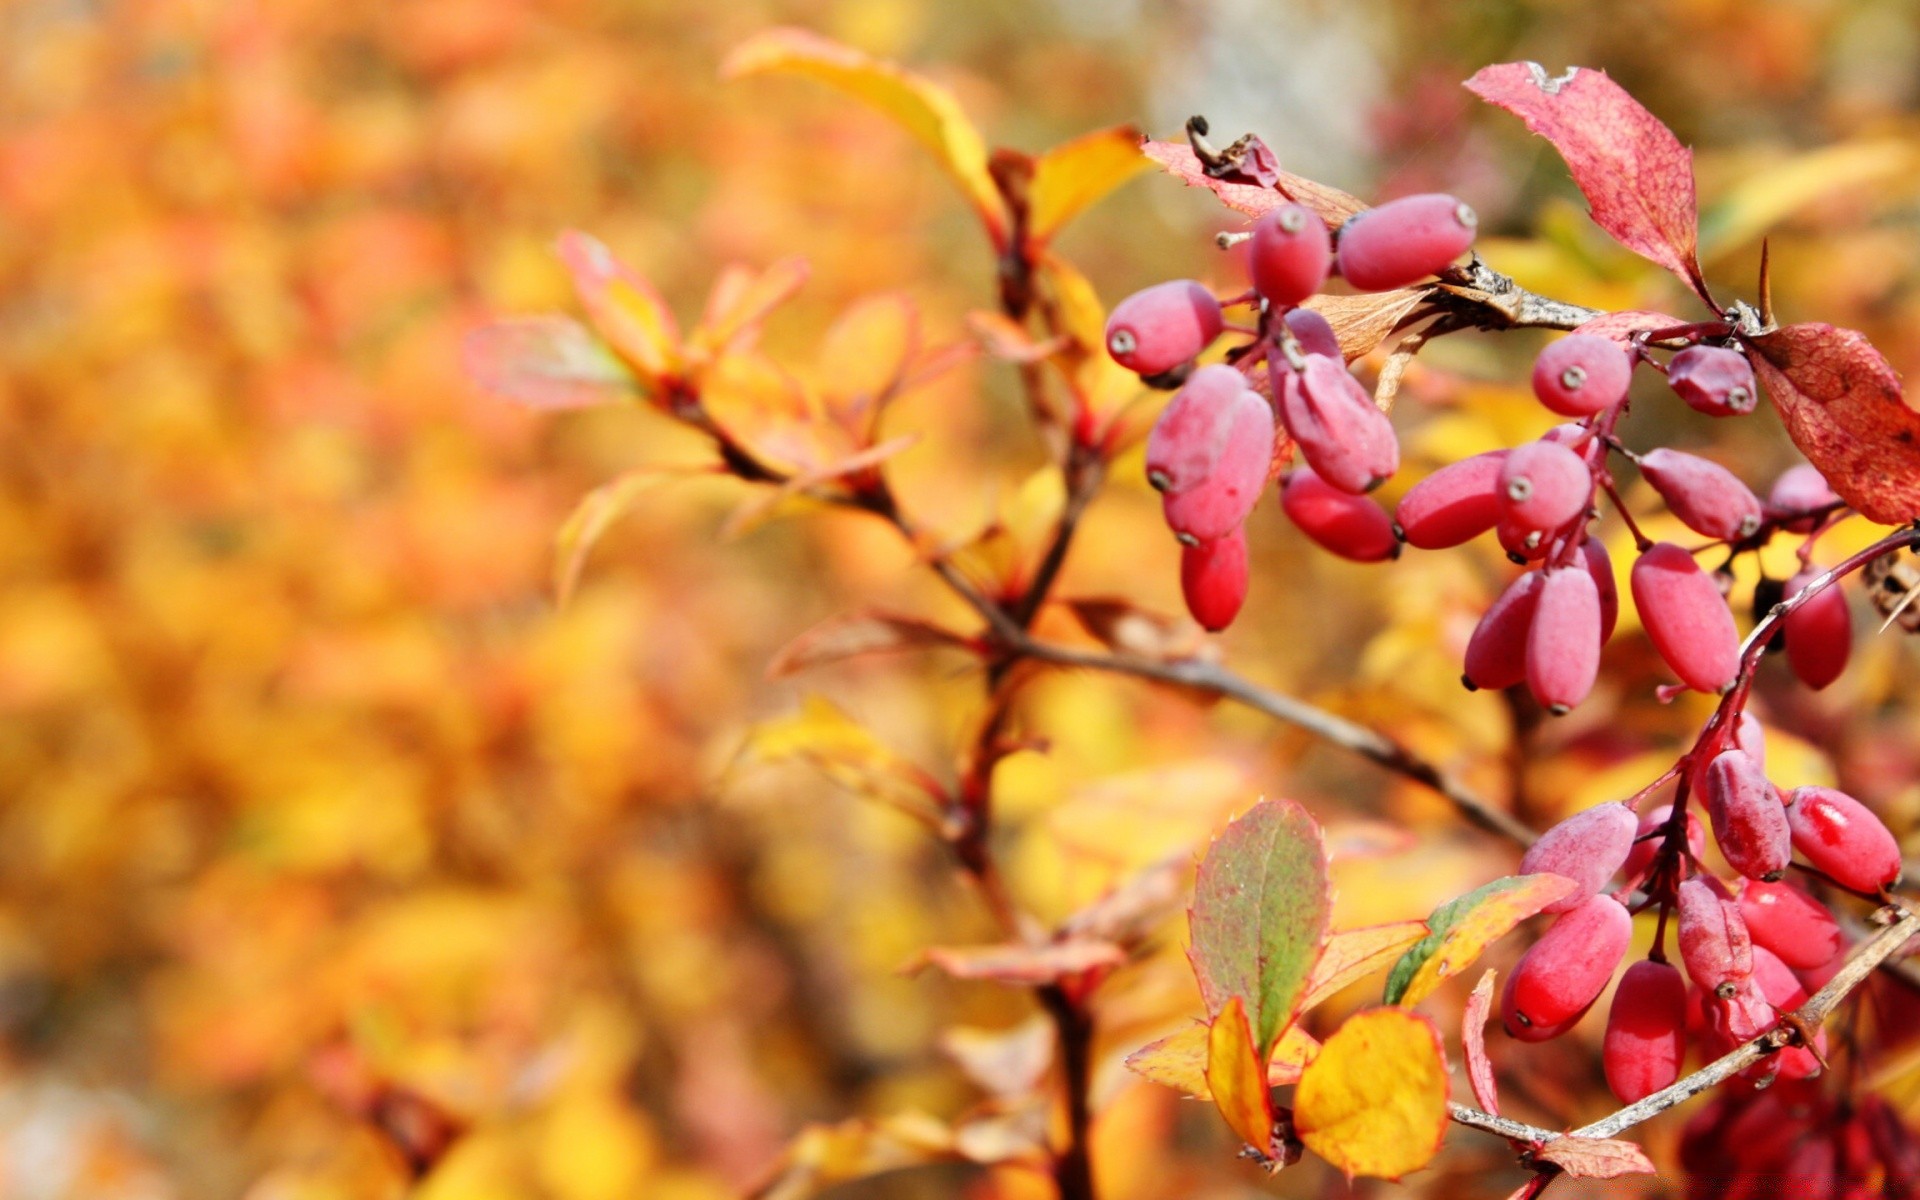 autumn nature leaf fall season outdoors flora tree branch color bright close-up fruit fair weather